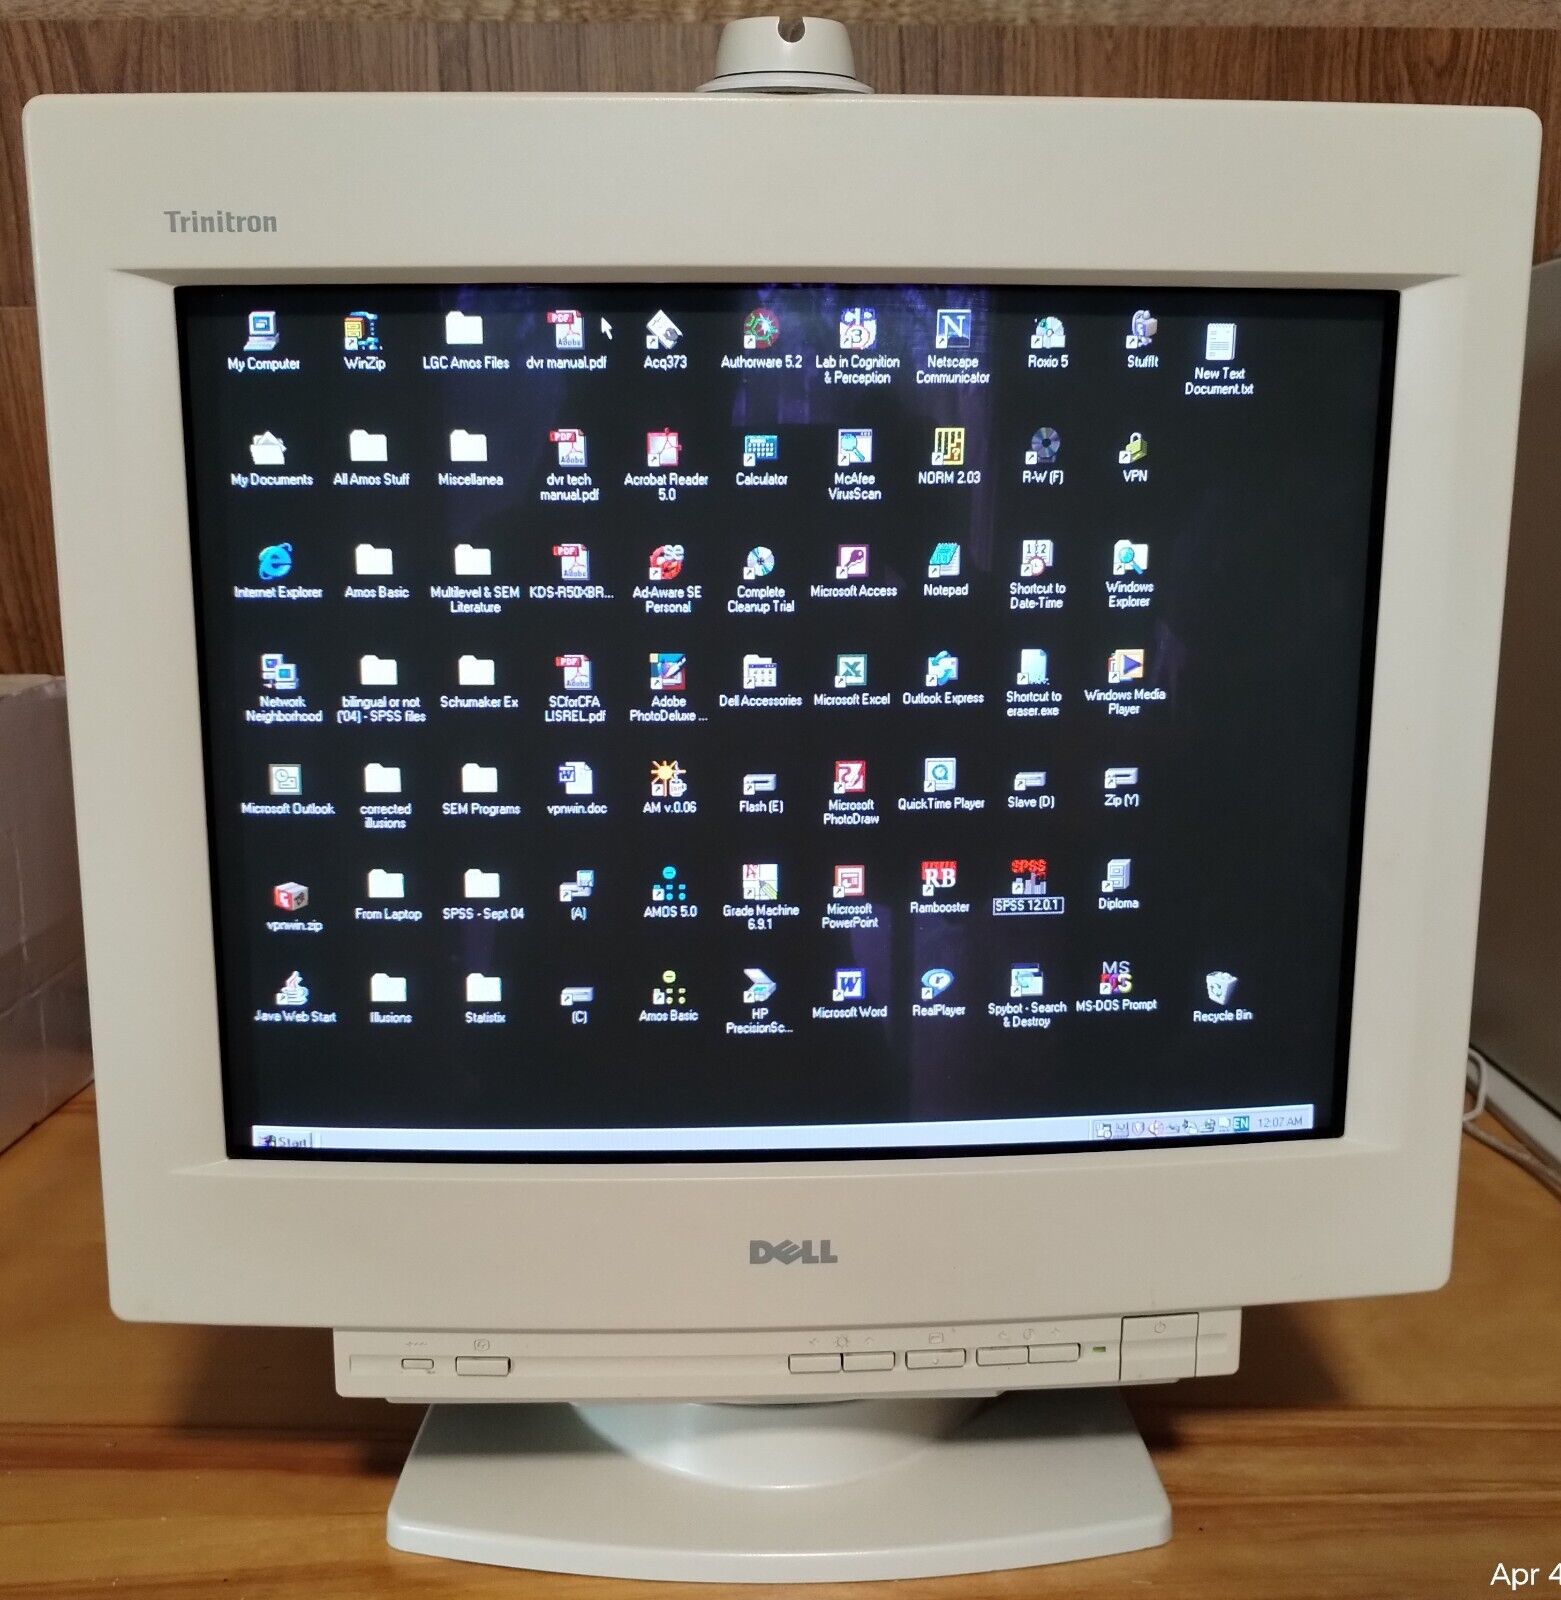 Dell Trinitron UltraScan CRT Monitor, 1000HS Series, D1025TM. Local Pickup only